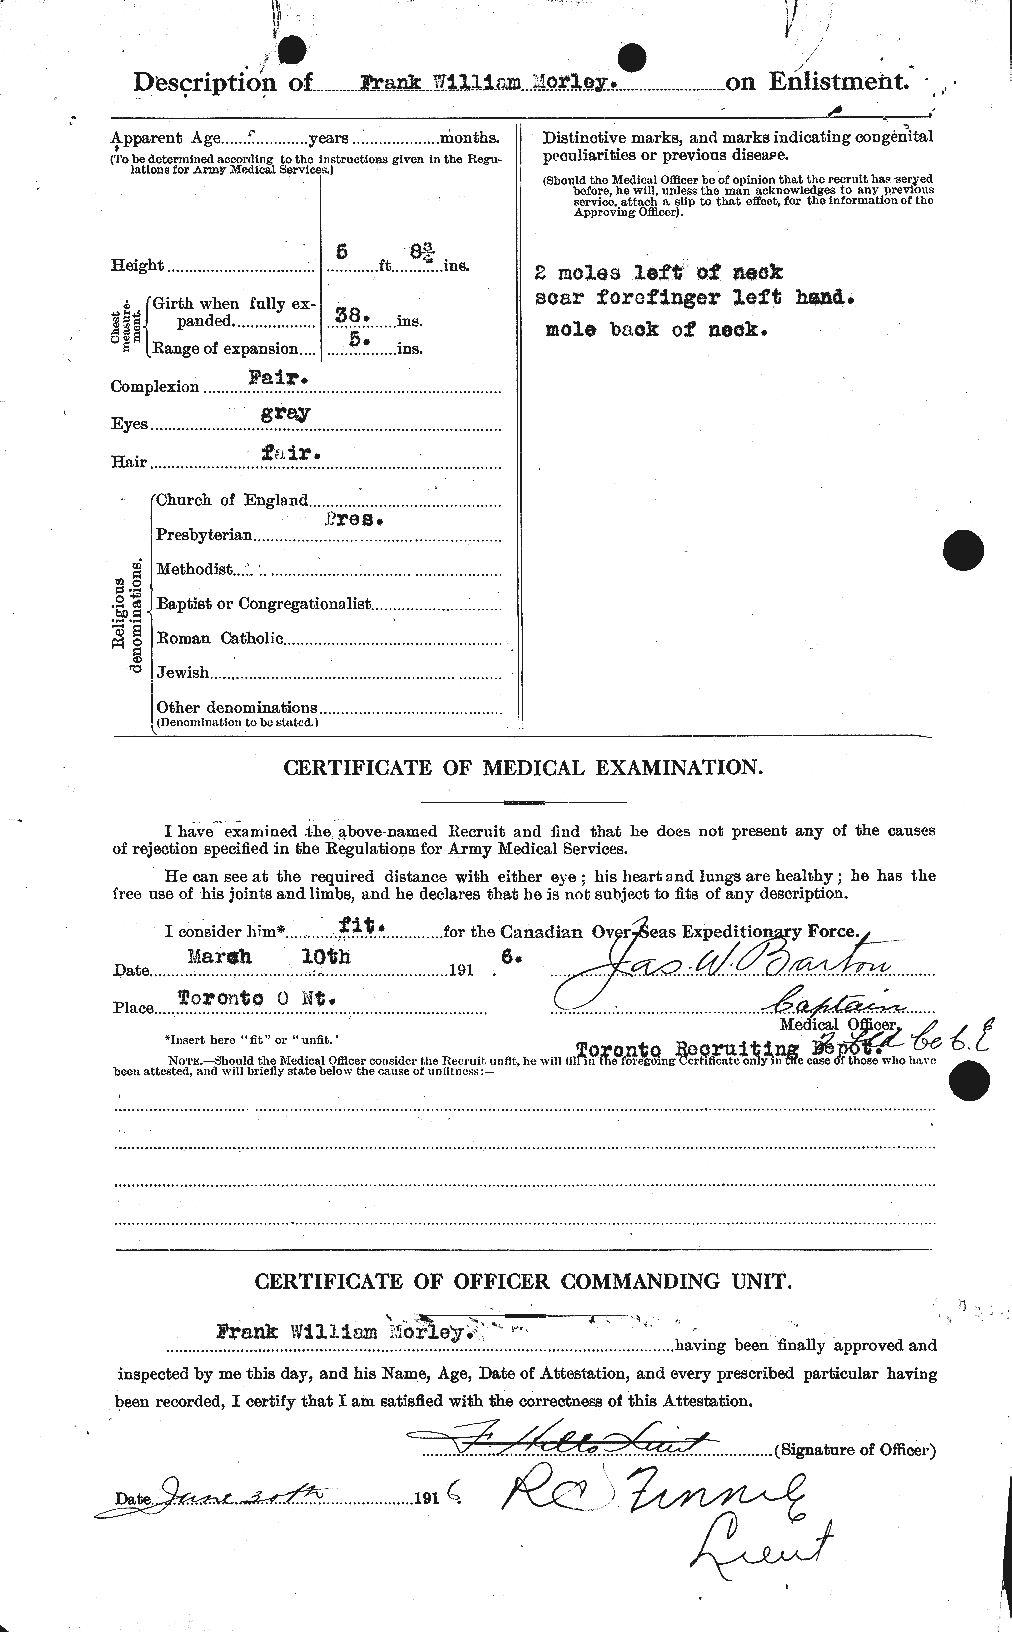 Personnel Records of the First World War - CEF 508051b